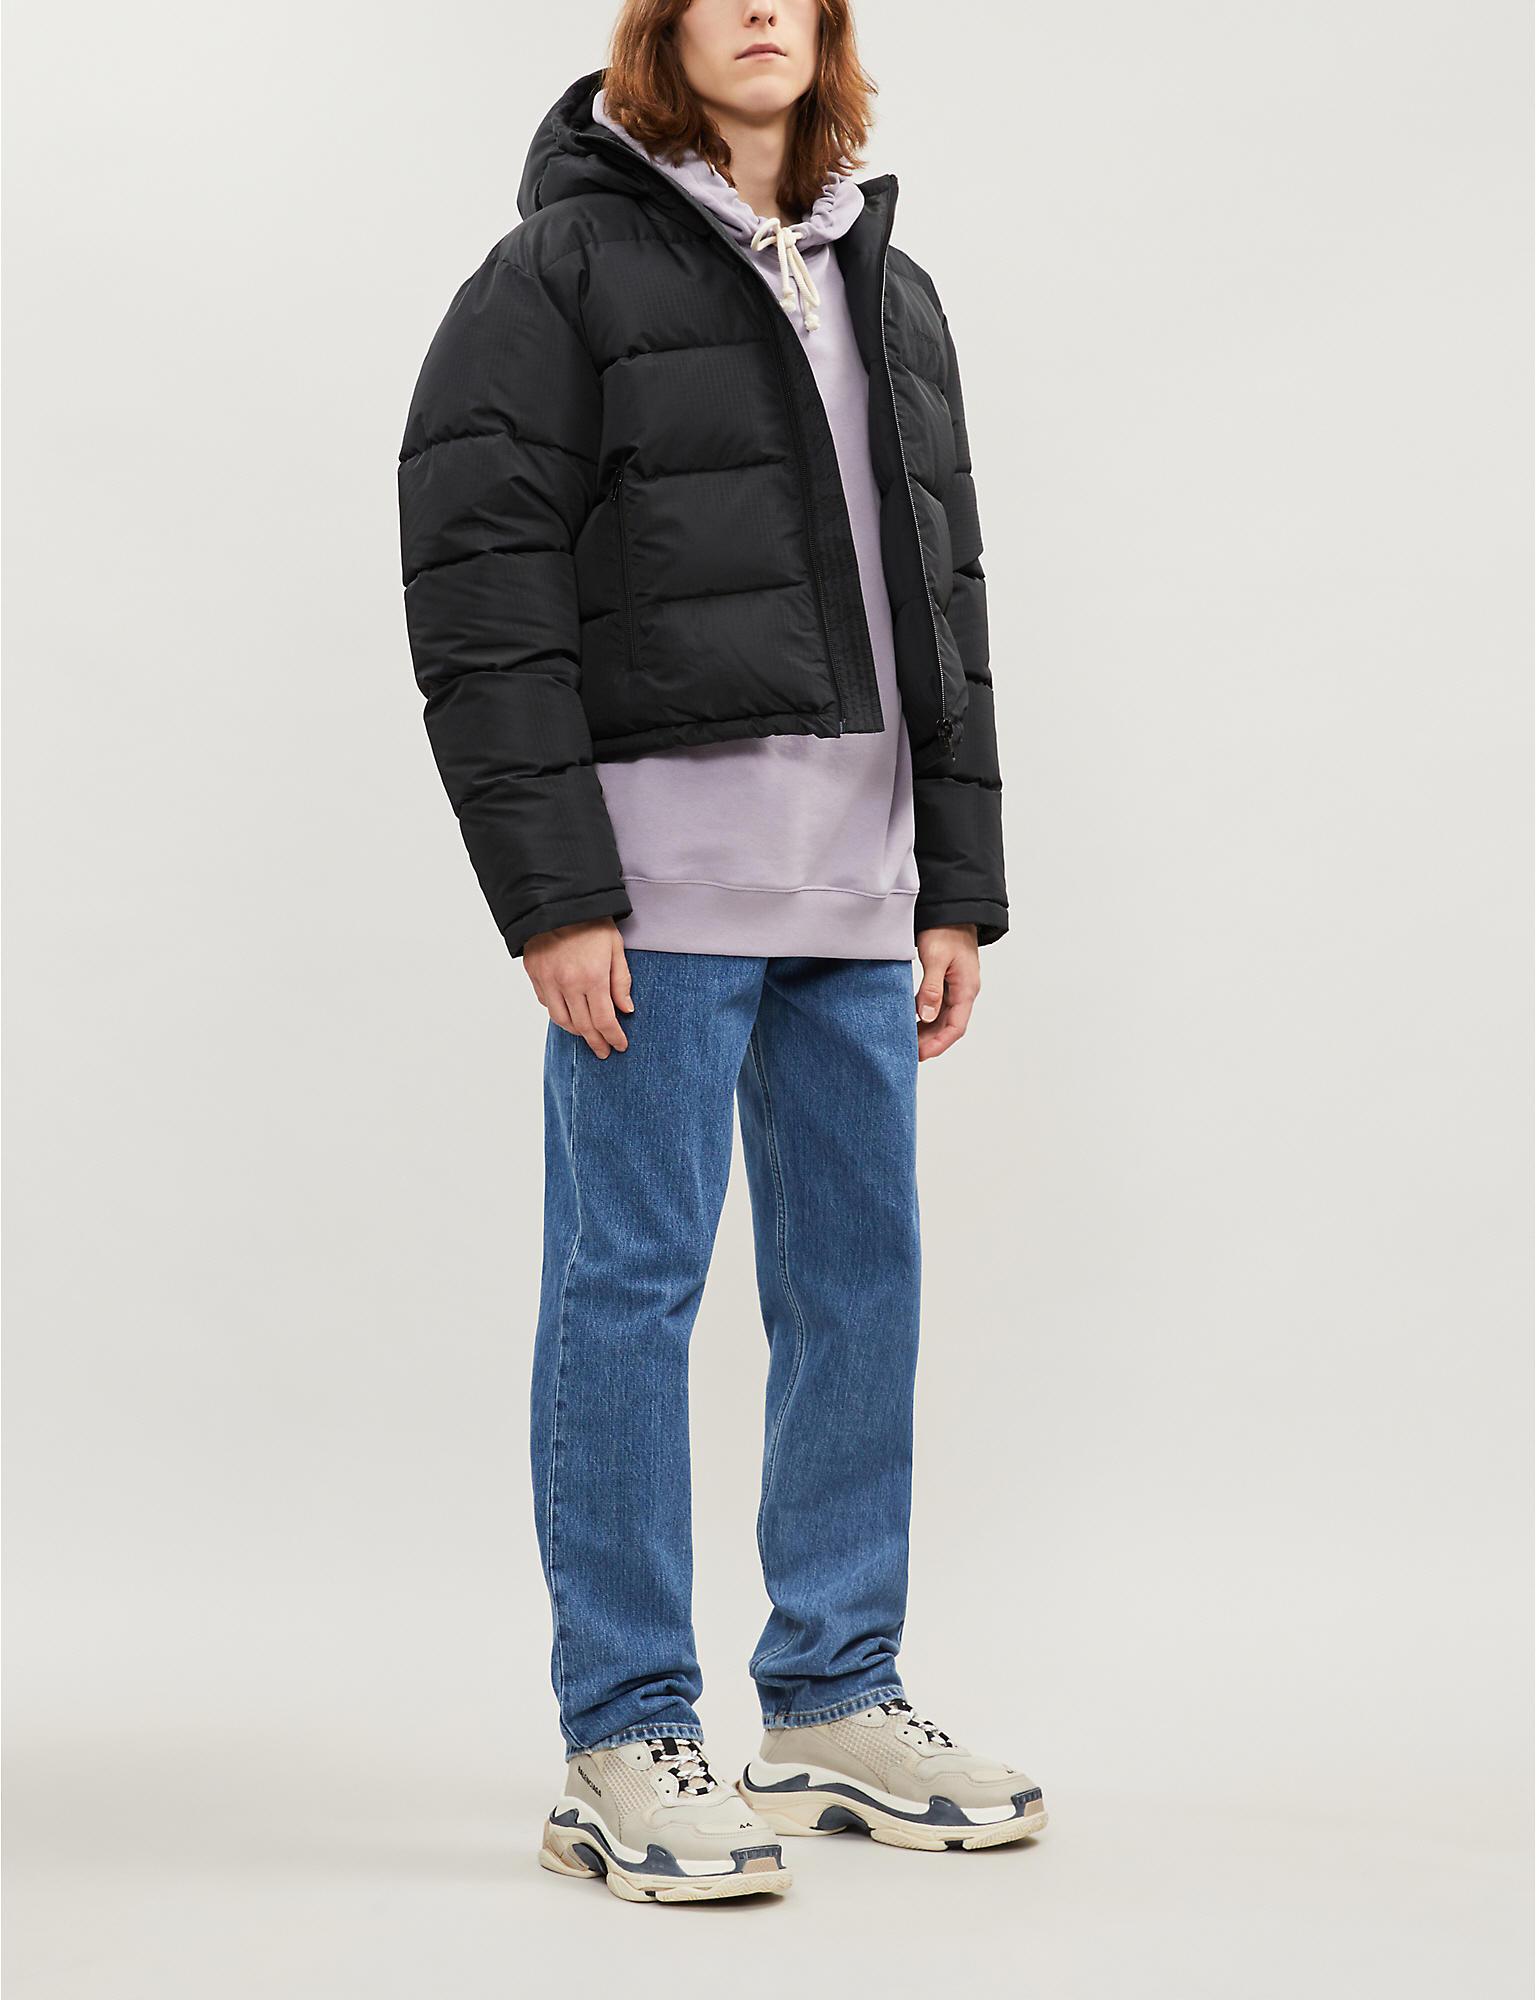 Balenciaga Cropped Shell Hooded Puffer Jacket in Black for Men | Lyst